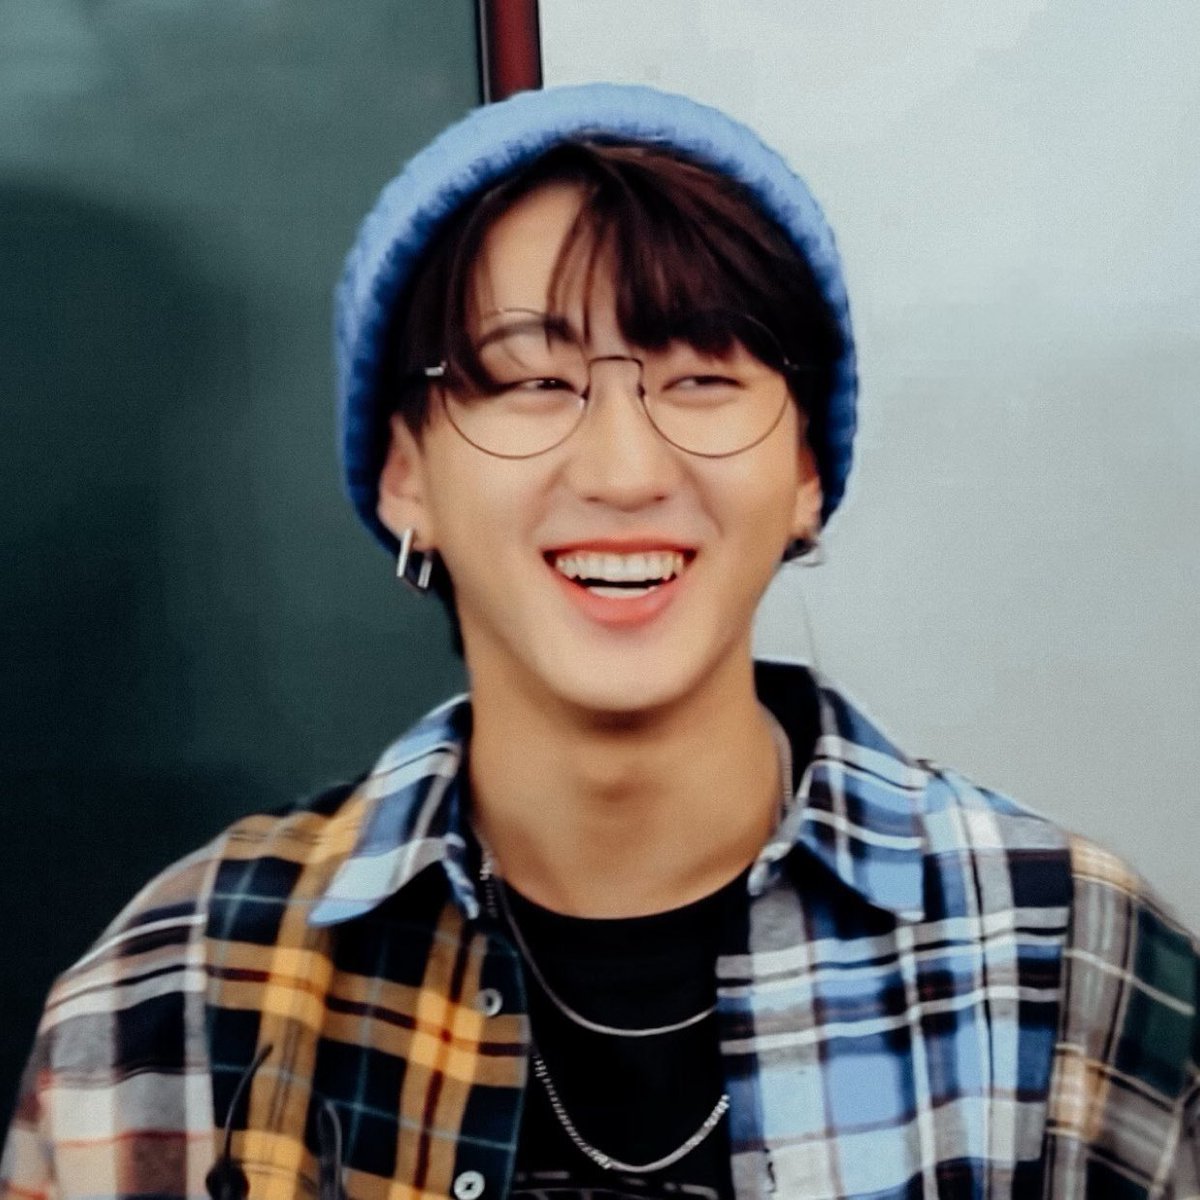 "changbin's smile makes u think ah today has been a good day"